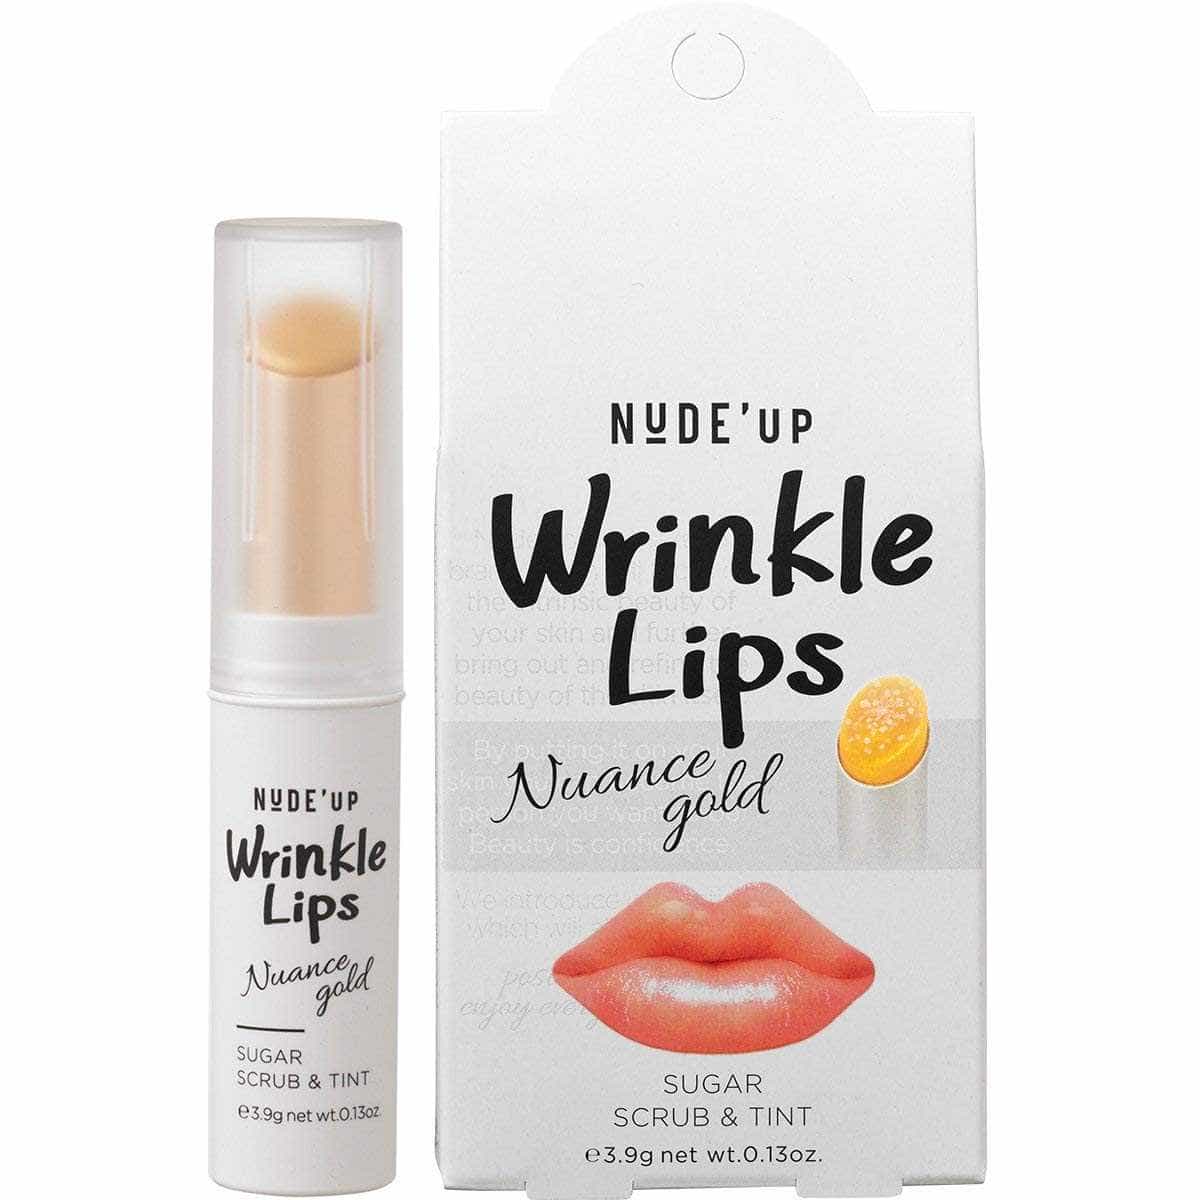 NUDE'UP W Wrinkle Lips Nuance Gold 3.9g